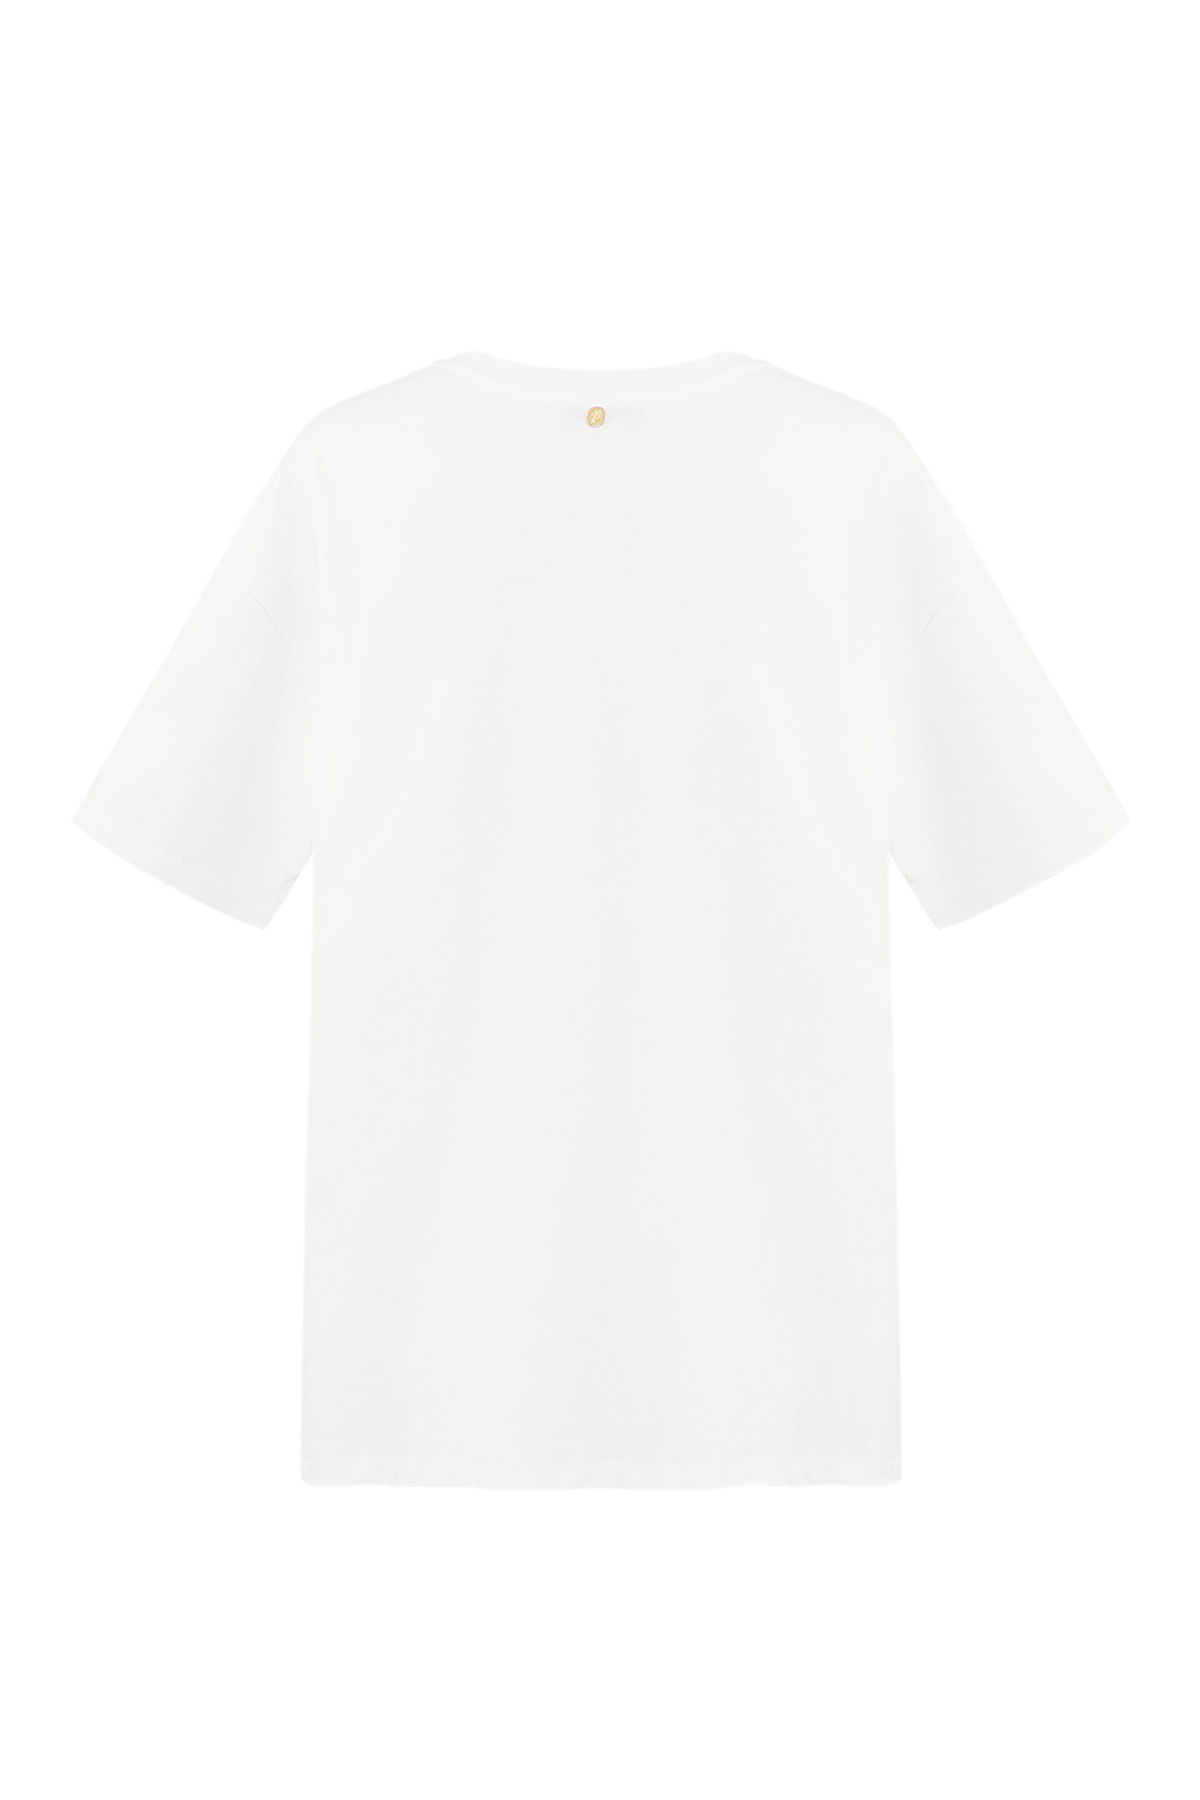 T-shirt mon amour - white h5 Picture8